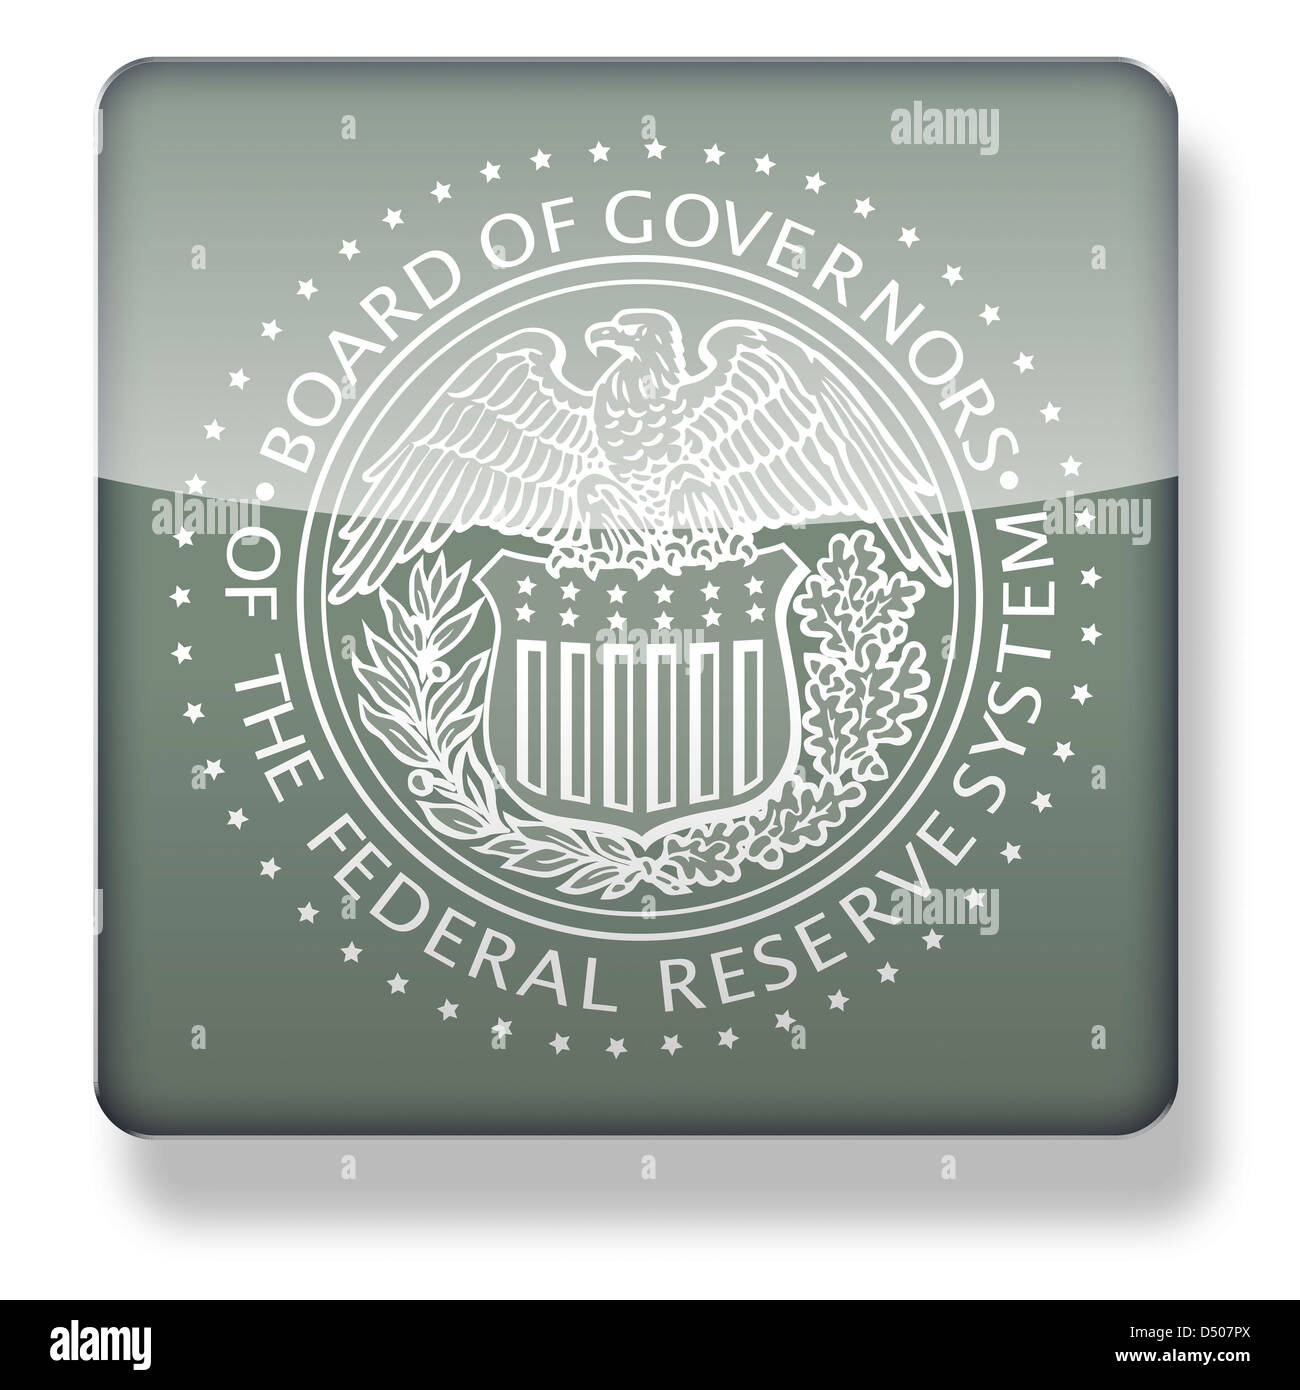 Board of Governors US Federal Reserve System seal as an app icon. Clipping path included. Stock Photo